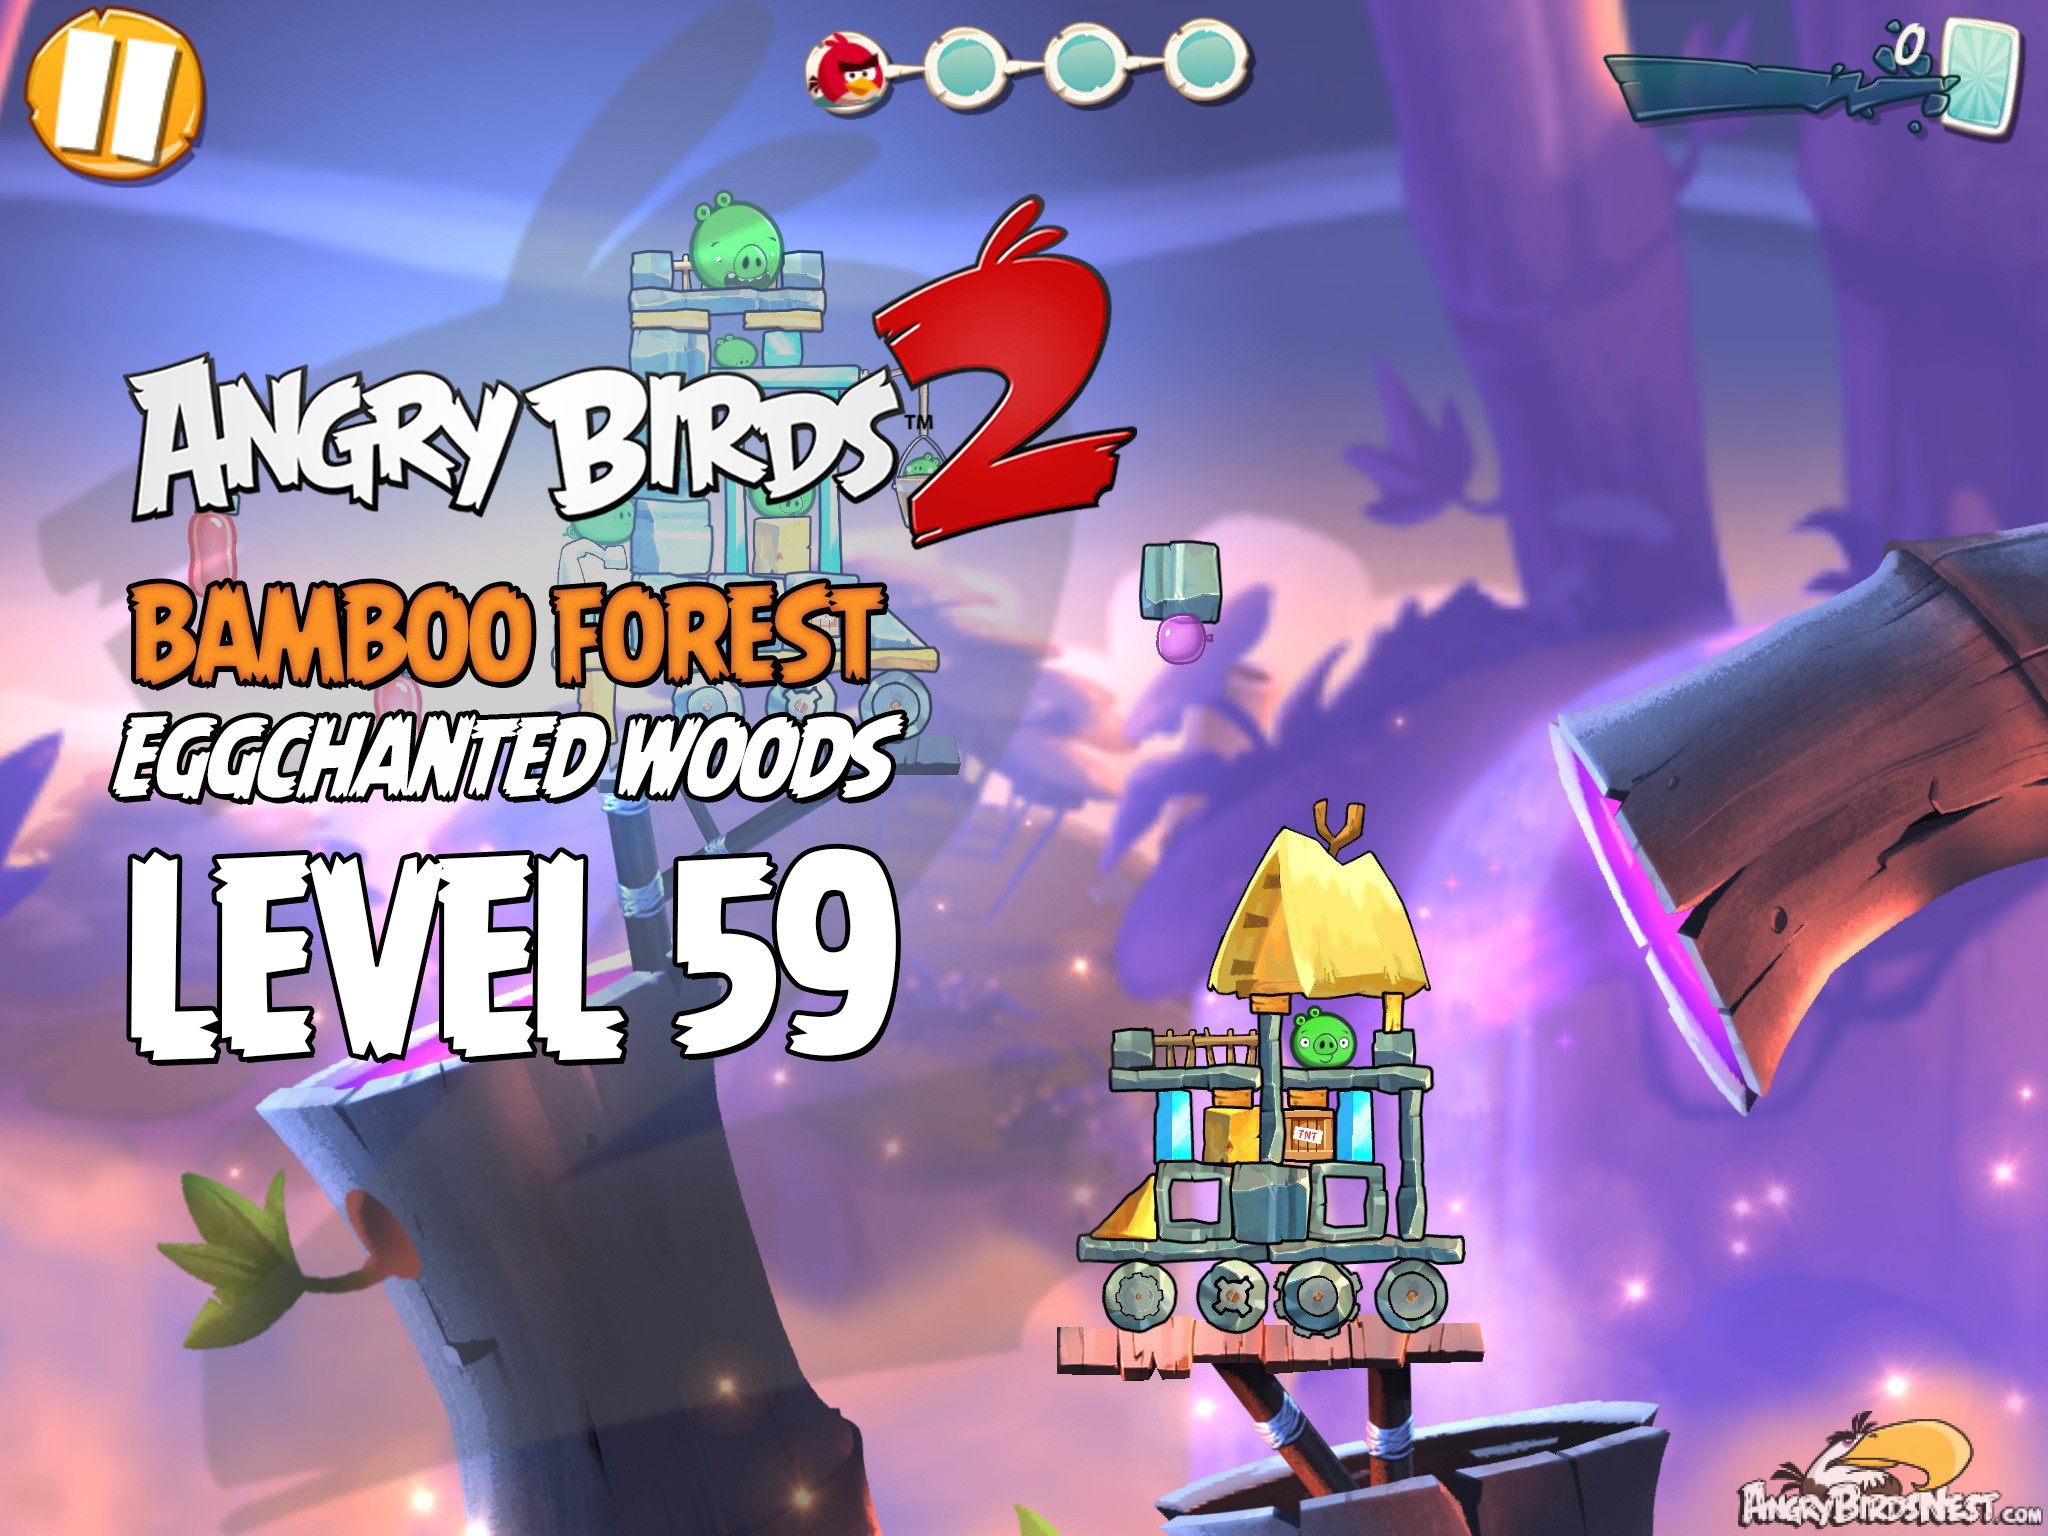 Angry Birds 2 Bamboo Forest Eggchanted Woods Level 59